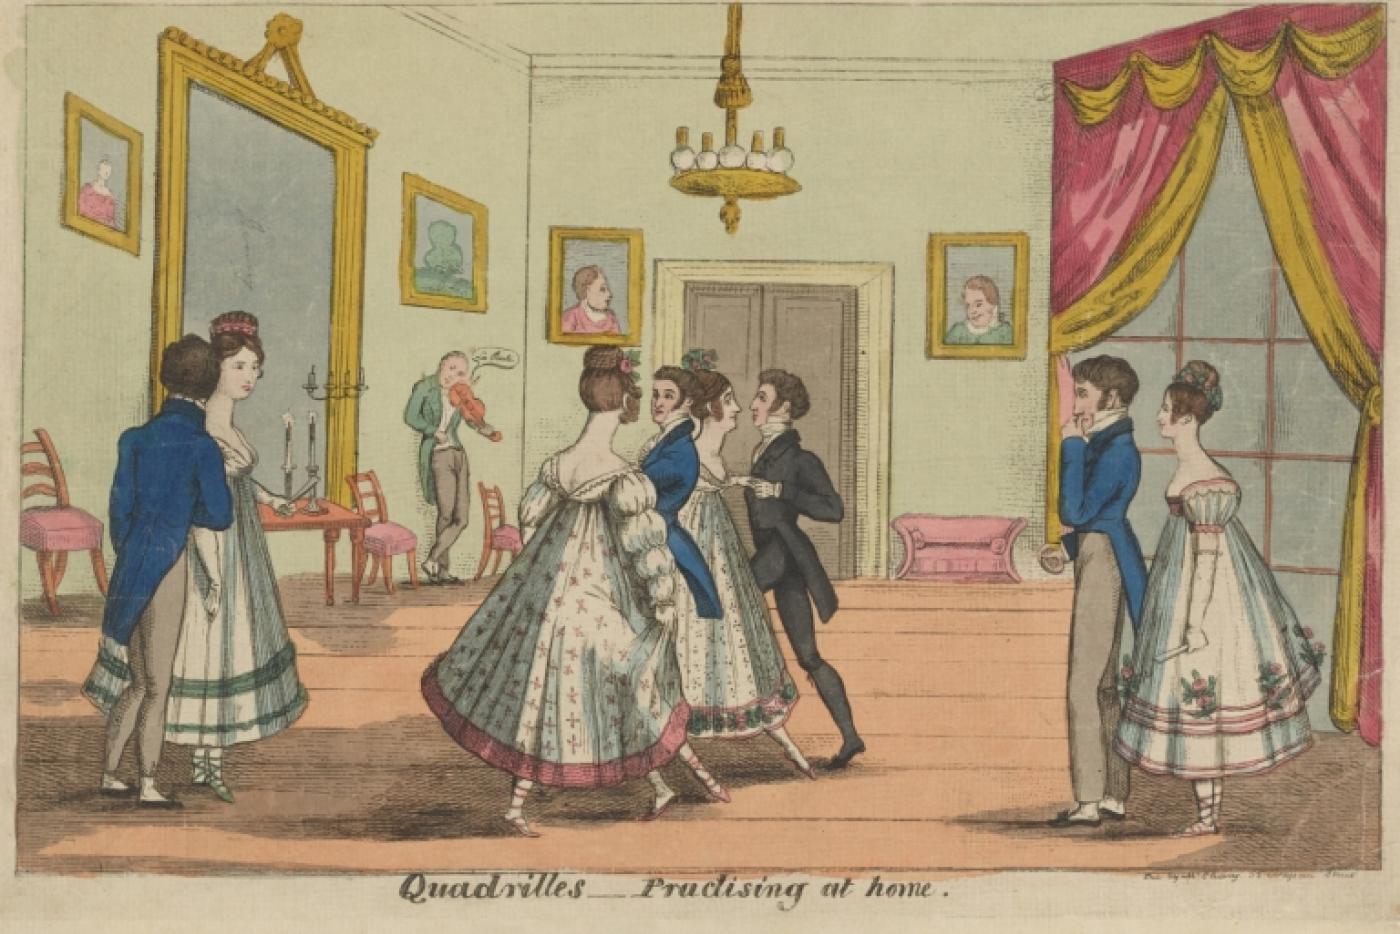 An 1830s image of people dancing at home